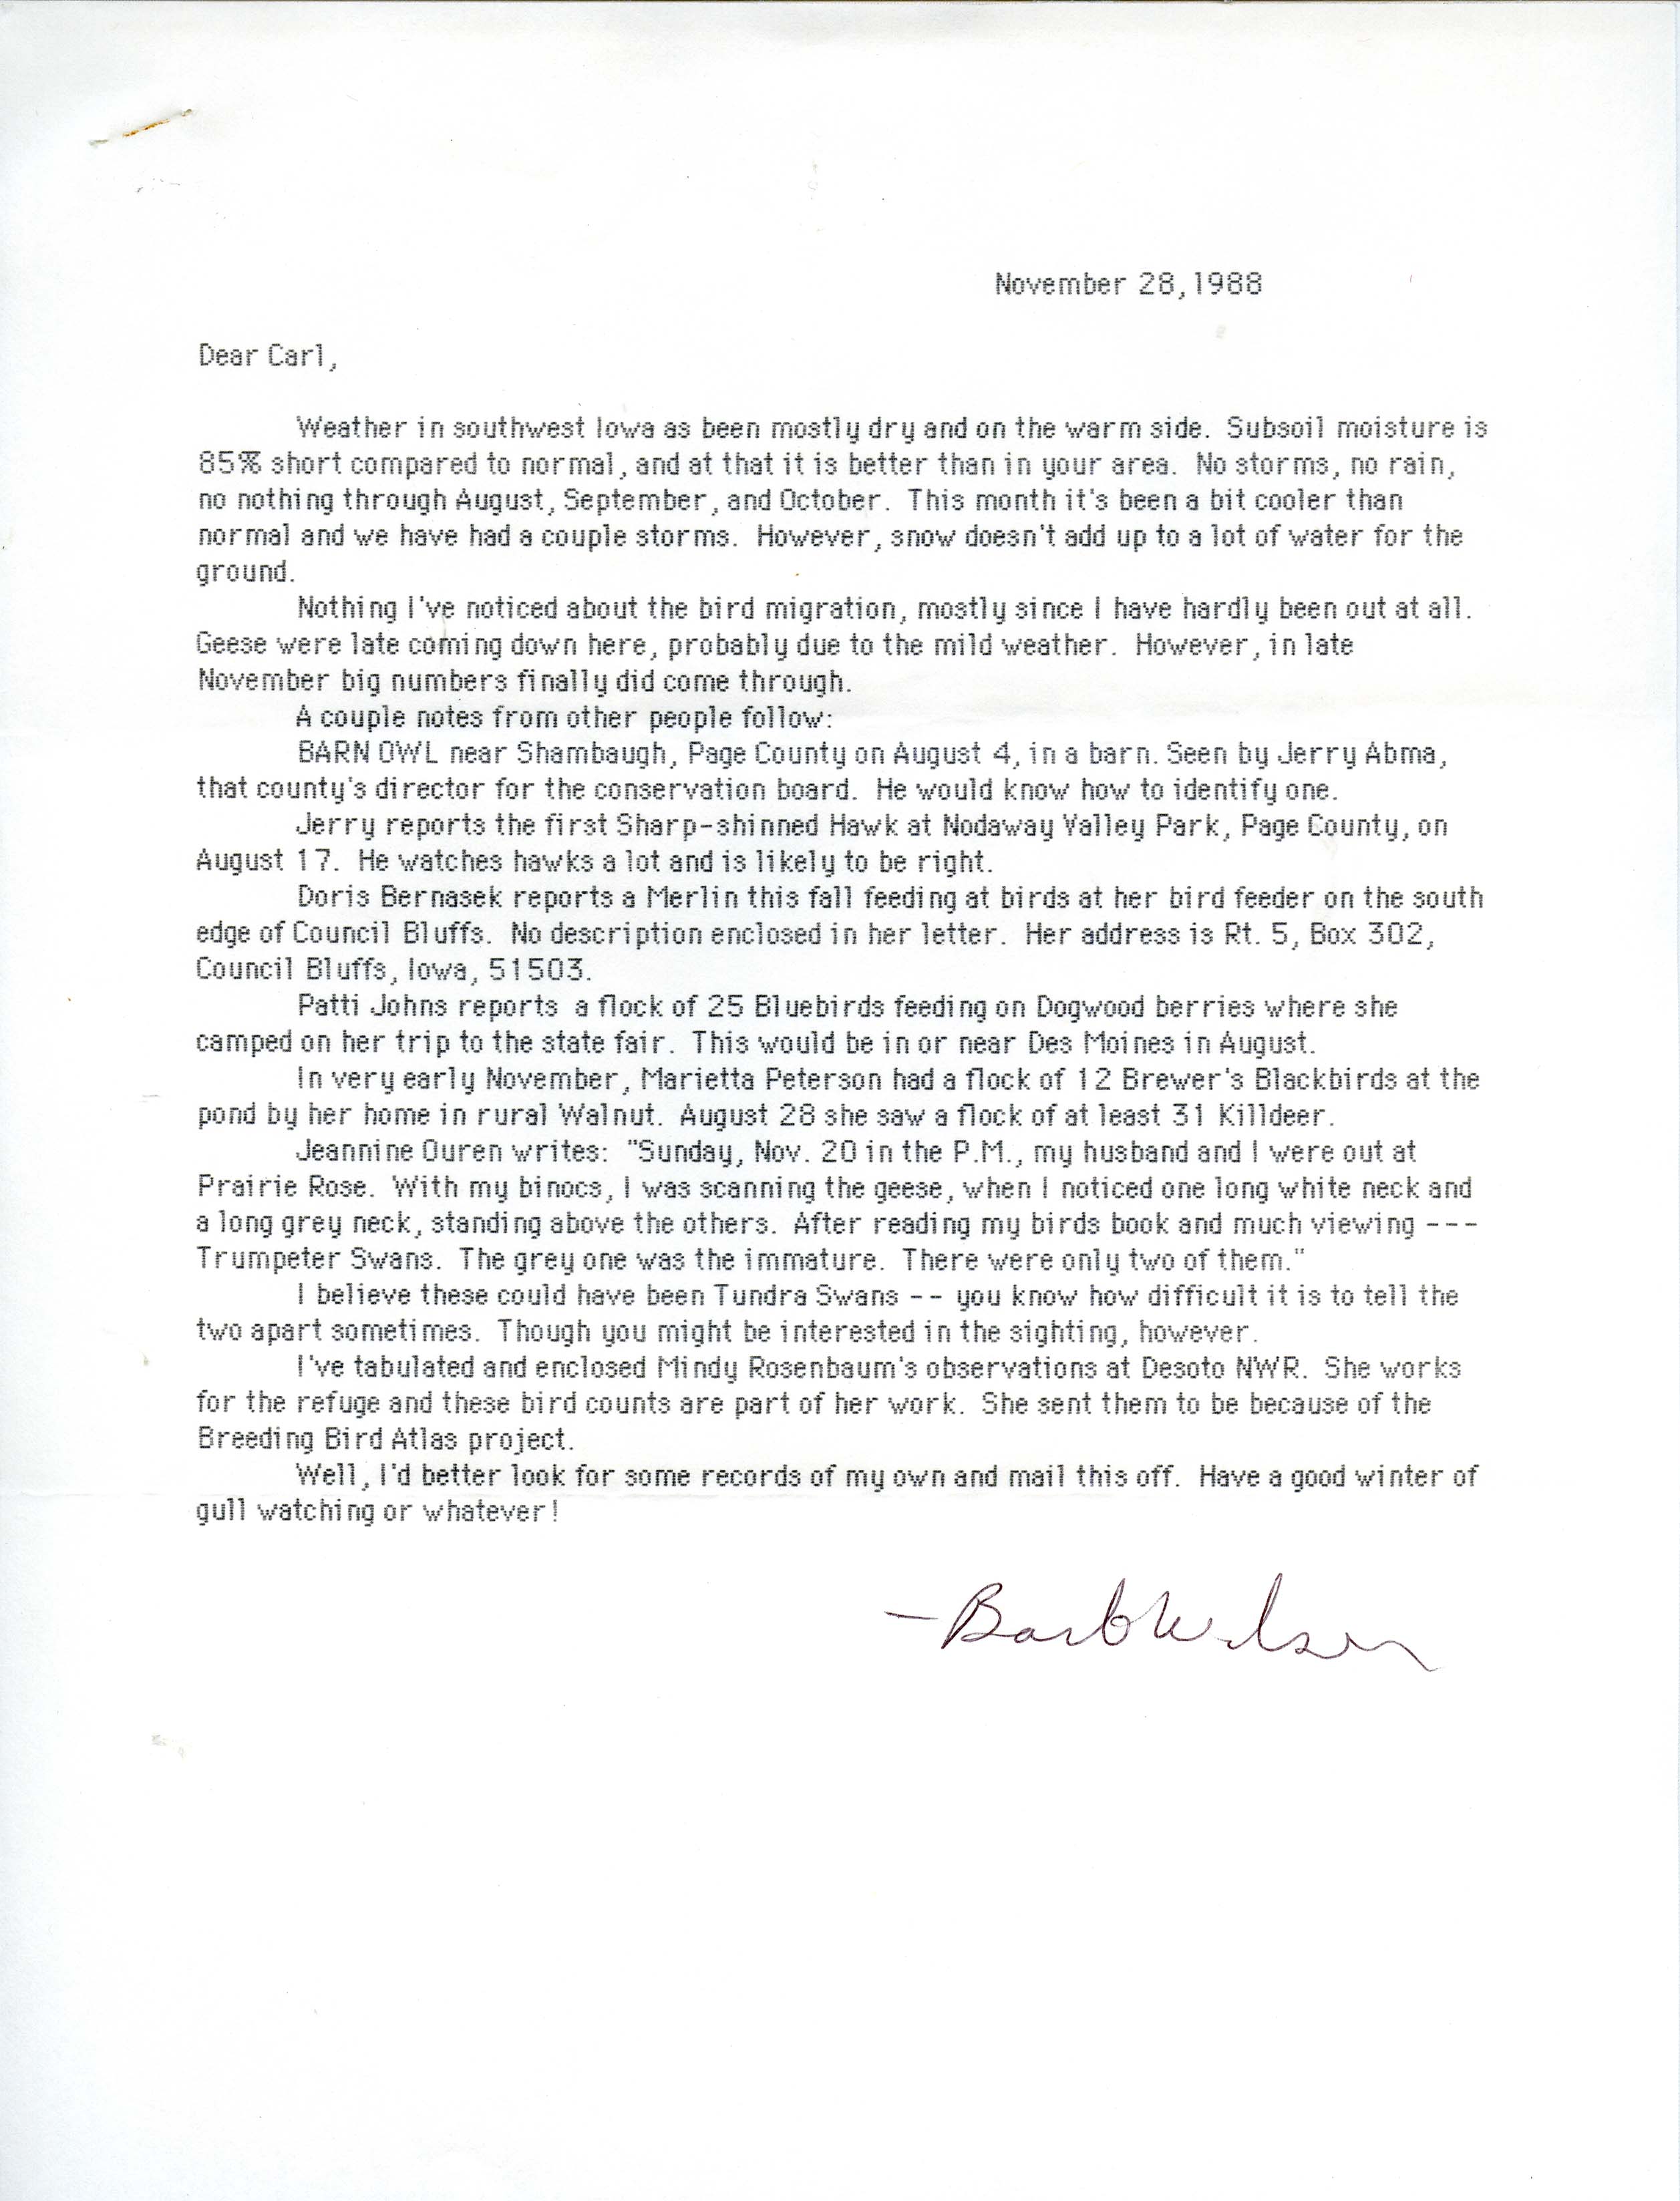 Field notes and Barbara L. Wilson letter to Carl J. Bendorf, November 28, 1988